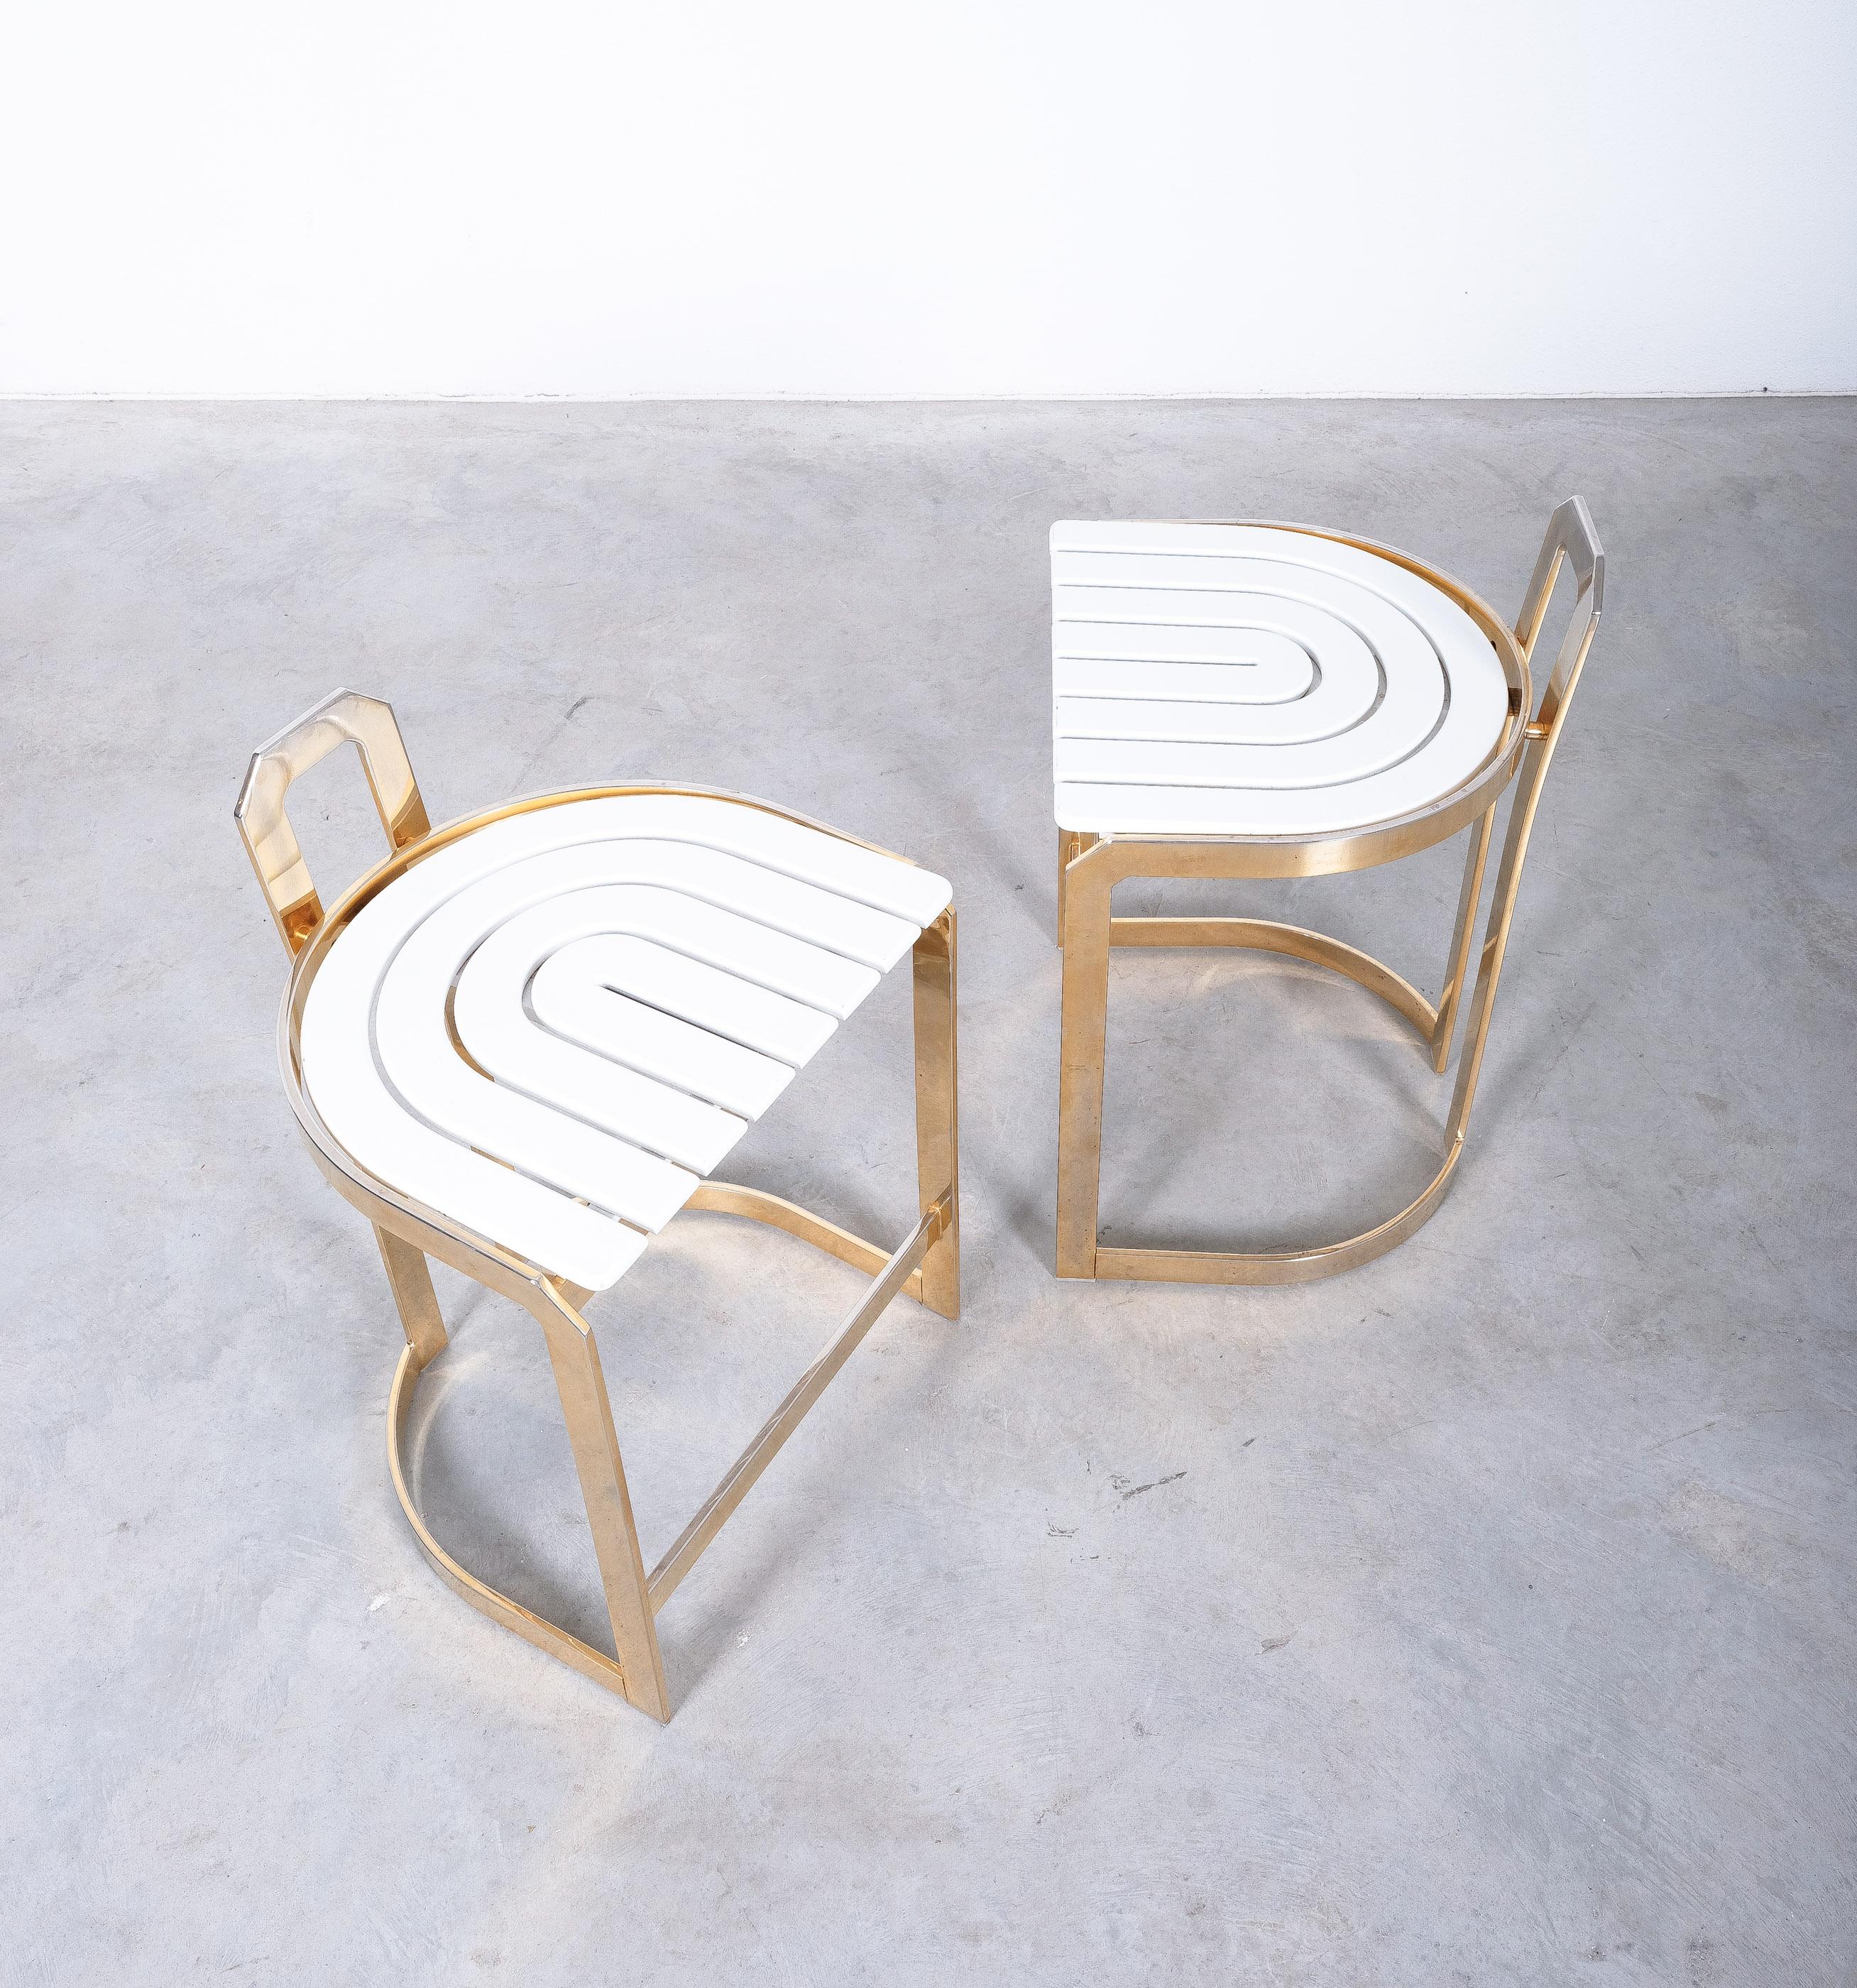 Pair of white and gold bar stools from Italy, circa 1970 - priced as a pair

Very stylish pair of barstools with a graphical wooden white seat and brassed steel frame. Those were probably manufactured in Italy in the late 1970's and are in good